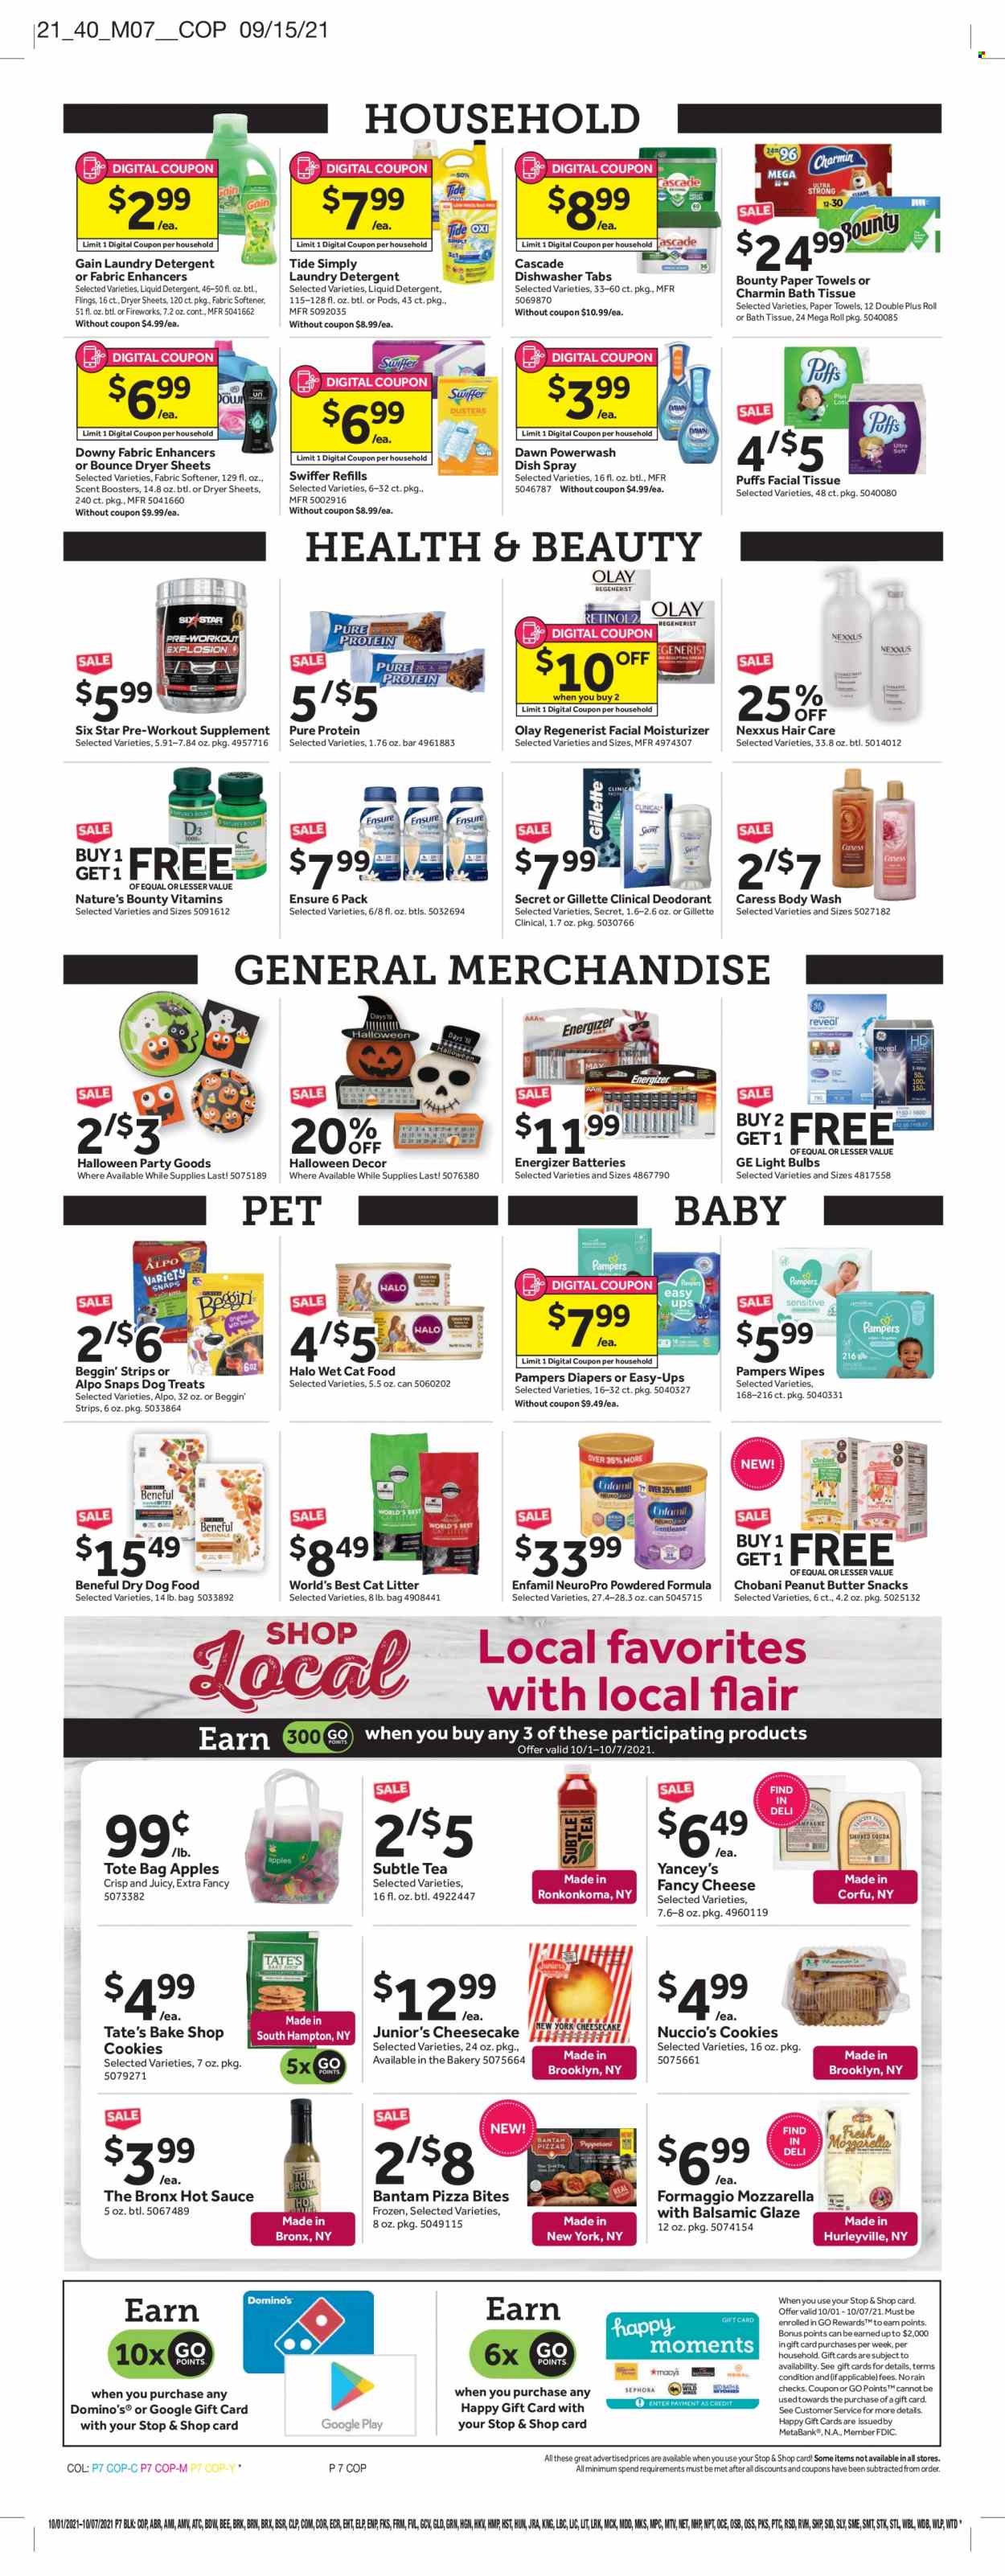 thumbnail - Stop & Shop Flyer - 10/01/2021 - 10/07/2021 - Sales products - cheesecake, apples, pizza, sauce, Chobani, strips, cookies, snack, balsamic glaze, hot sauce, peanut butter, tea, beer, Enfamil, wipes, Pampers, nappies, bath tissue, kitchen towels, paper towels, Charmin, Cascade, Gain, Tide, fabric softener, liquid detergent, laundry detergent, Bounce, dryer sheets, scent booster, Downy Laundry, body wash, moisturizer, Olay, Nexxus, anti-perspirant, deodorant, battery, bulb, Energizer, light bulb, cat litter, animal food, cat food, dog food, dry dog food, Beggin', Alpo, wet cat food, Nature's Bounty. Page 7.